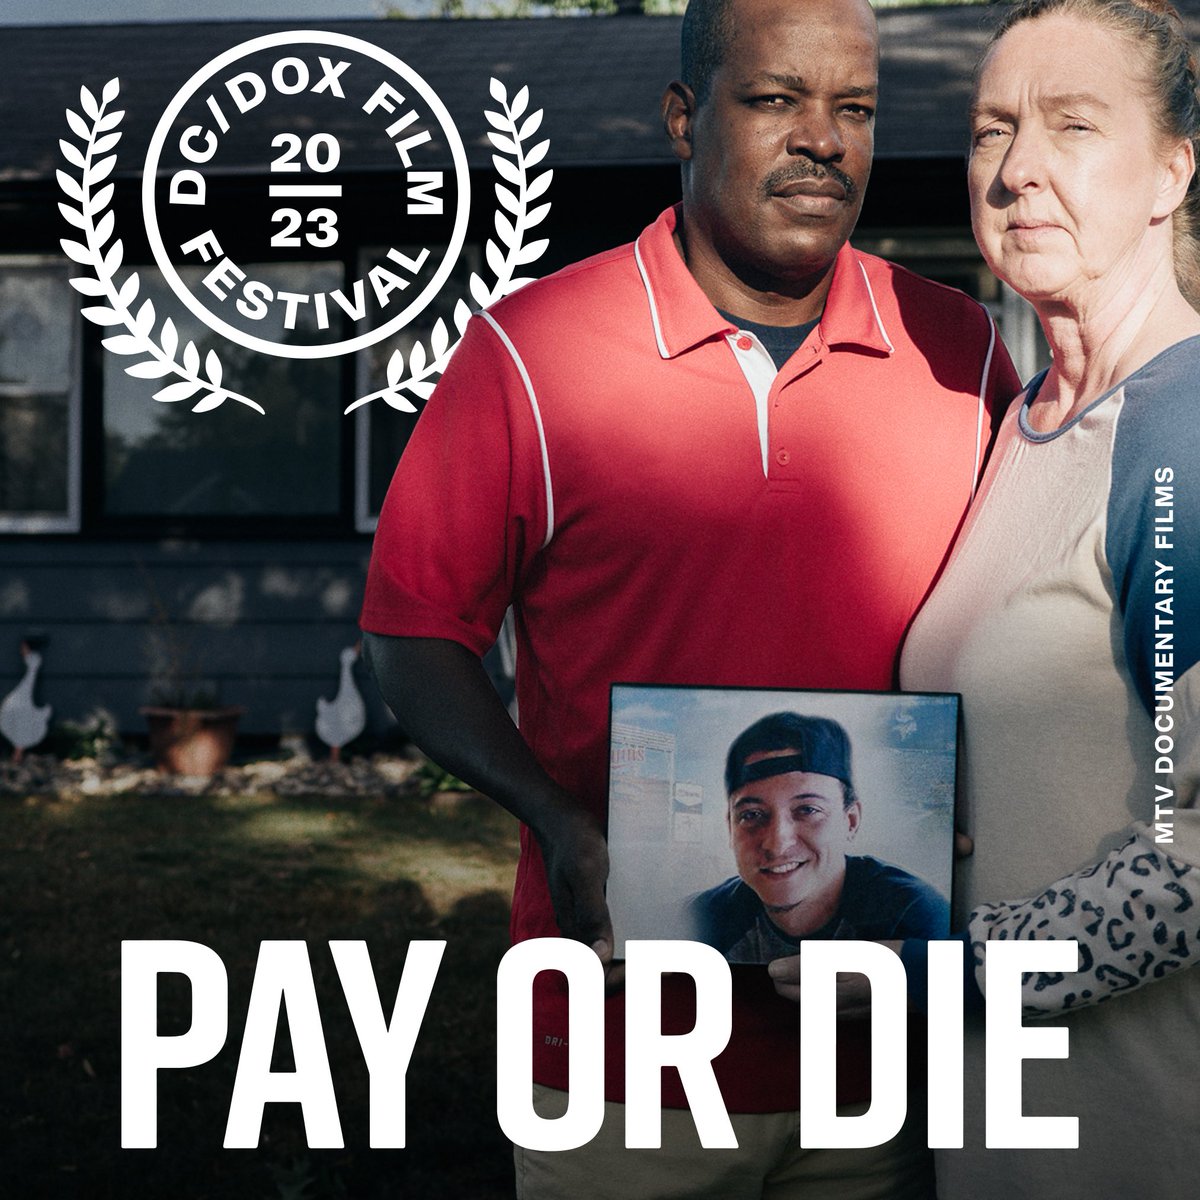 OFFICIAL SELECTION: @PayorDieFilm premieres at @dcdoxfest this June! 
#PayorDie #dcdoxfest